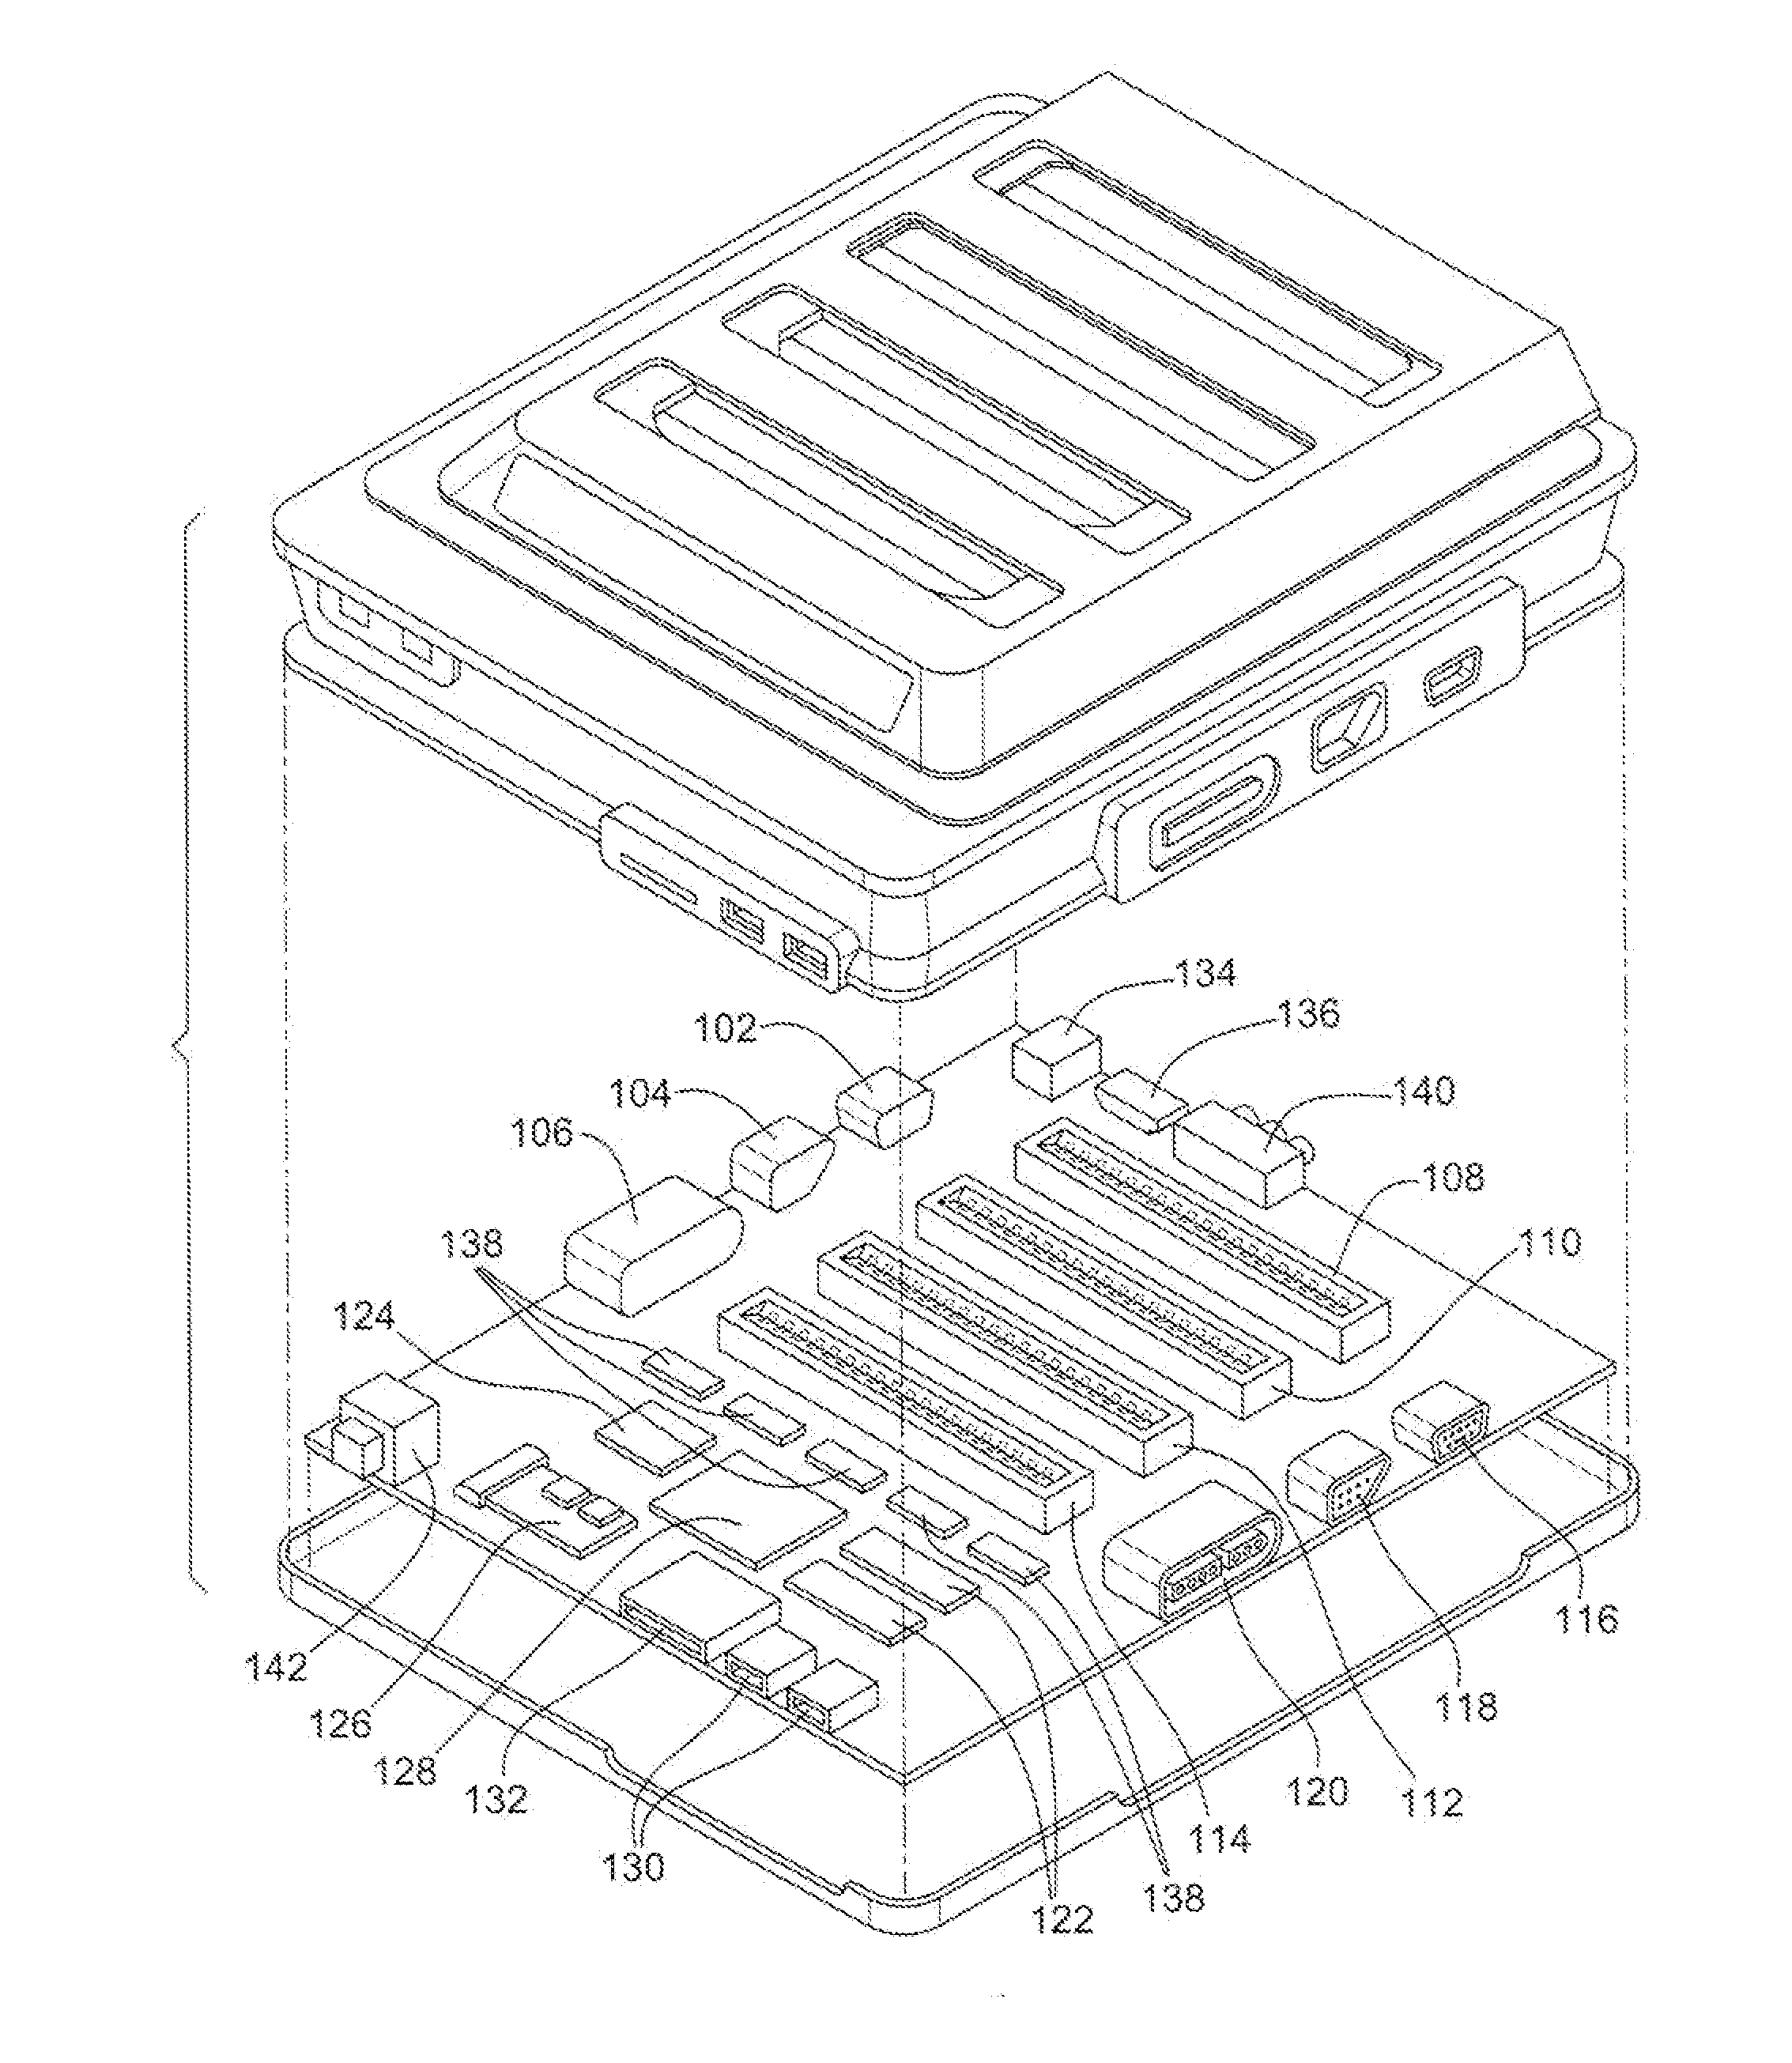 Methods, Apparatus and Systems for Use of a Non-Native Chipset to Play Original Video Game Cartridges